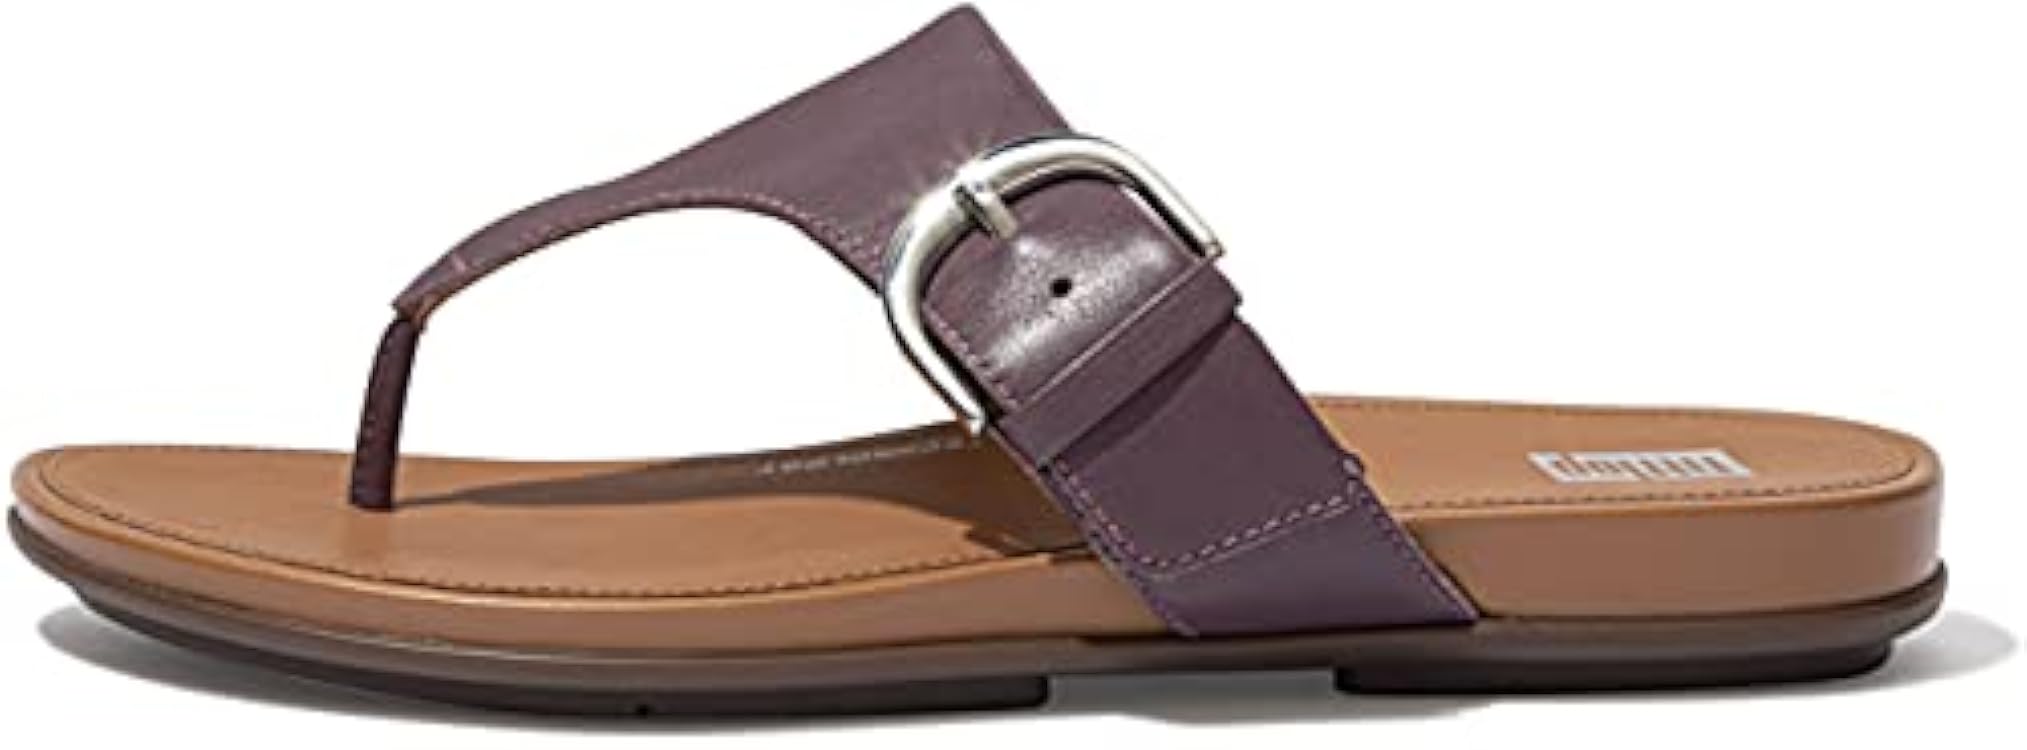 Fitflop Gracie Toe-Post Sandals, Infradito Donna 101017318